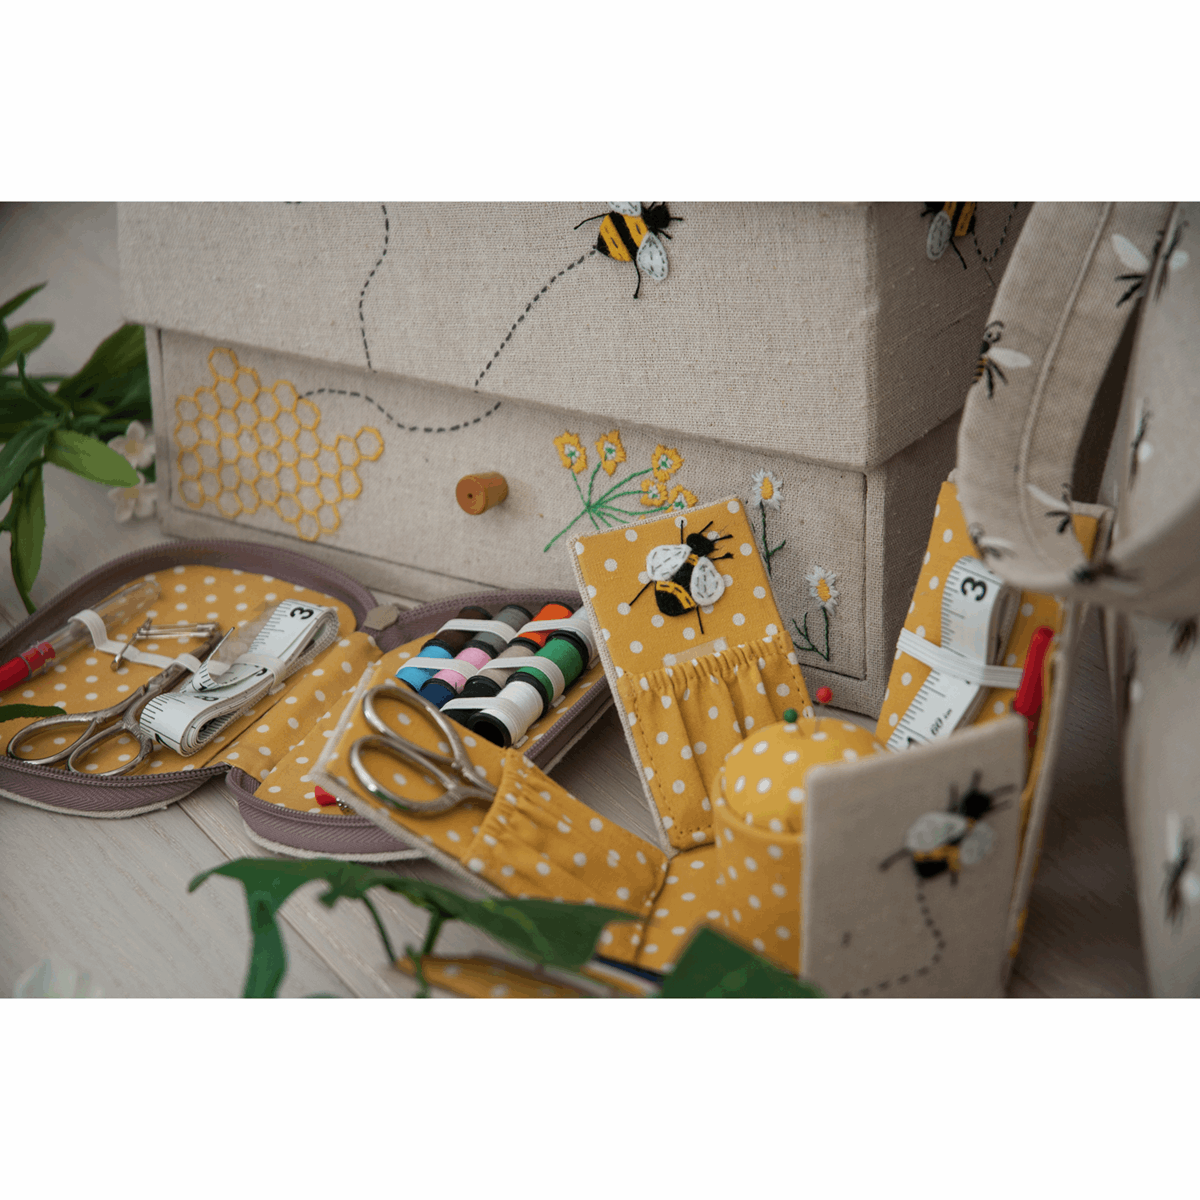 Appliqué Bee Victorian Sewing Kit